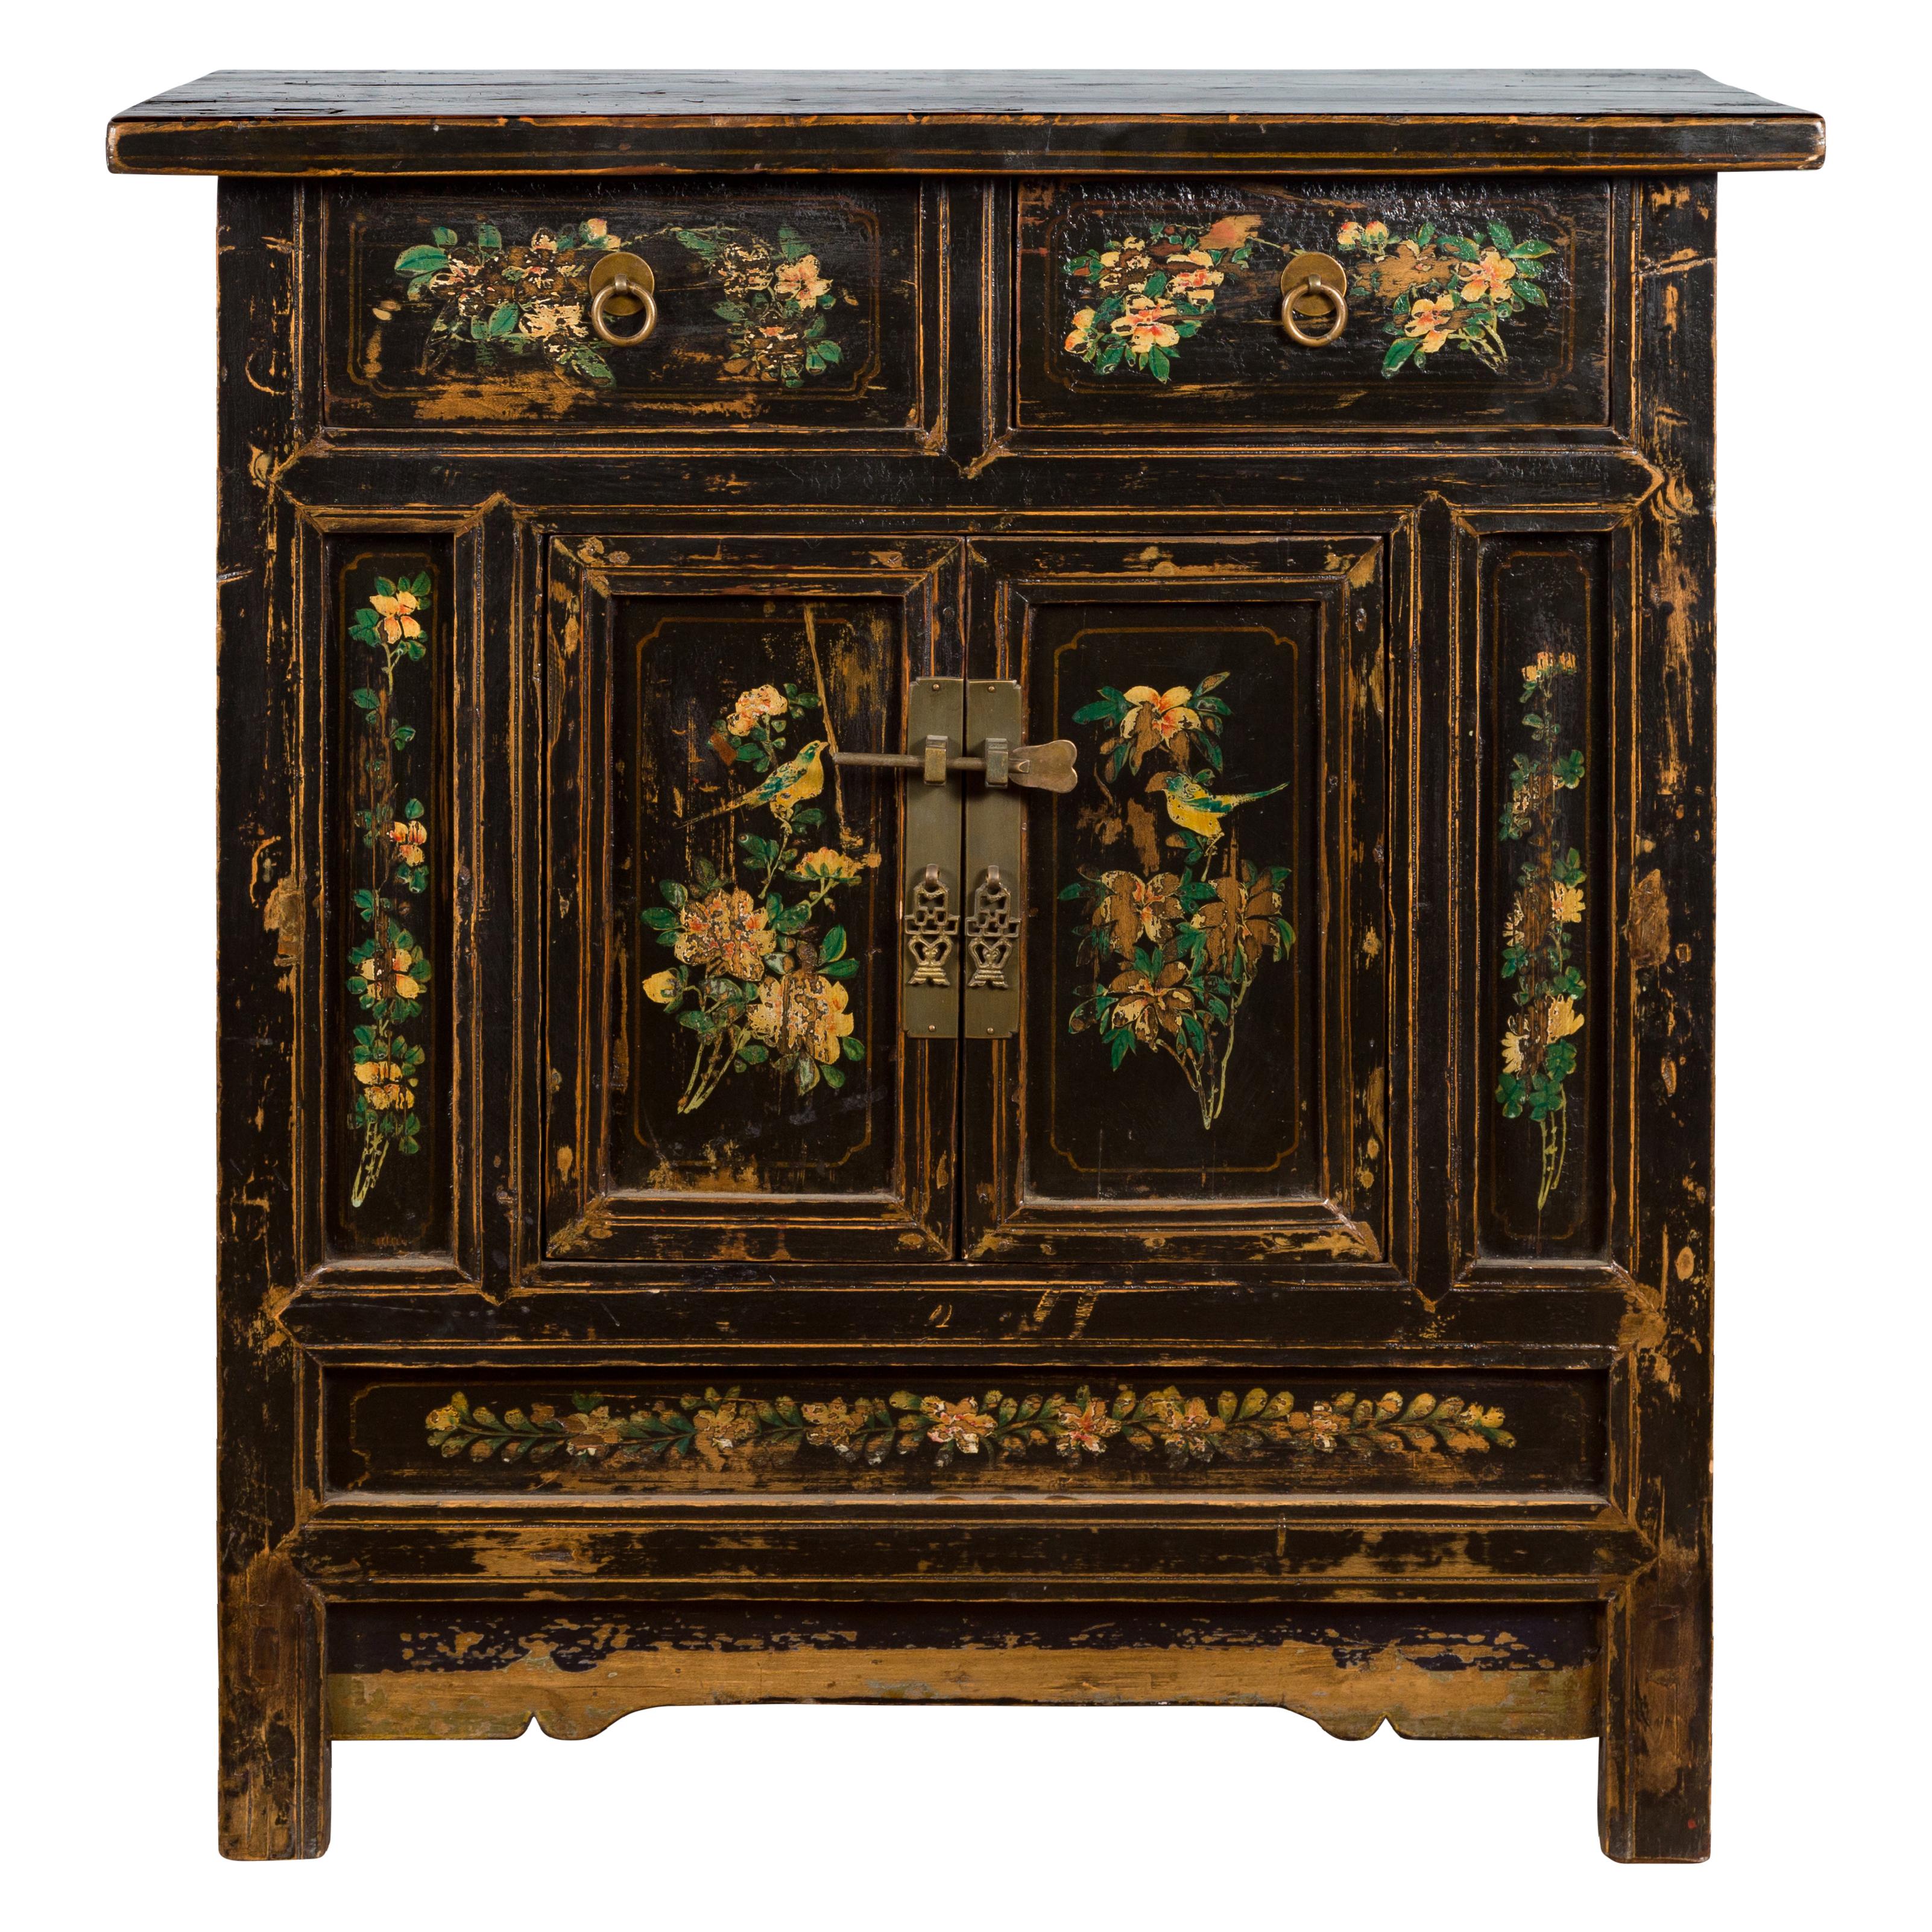 A Chinese Qing Dynasty period painted wood cabinet from the 19th century, with floral décor and brass hardware. Created in China during the 19th century, this painted cabinet features a rectangular top sitting above two drawers followed by two